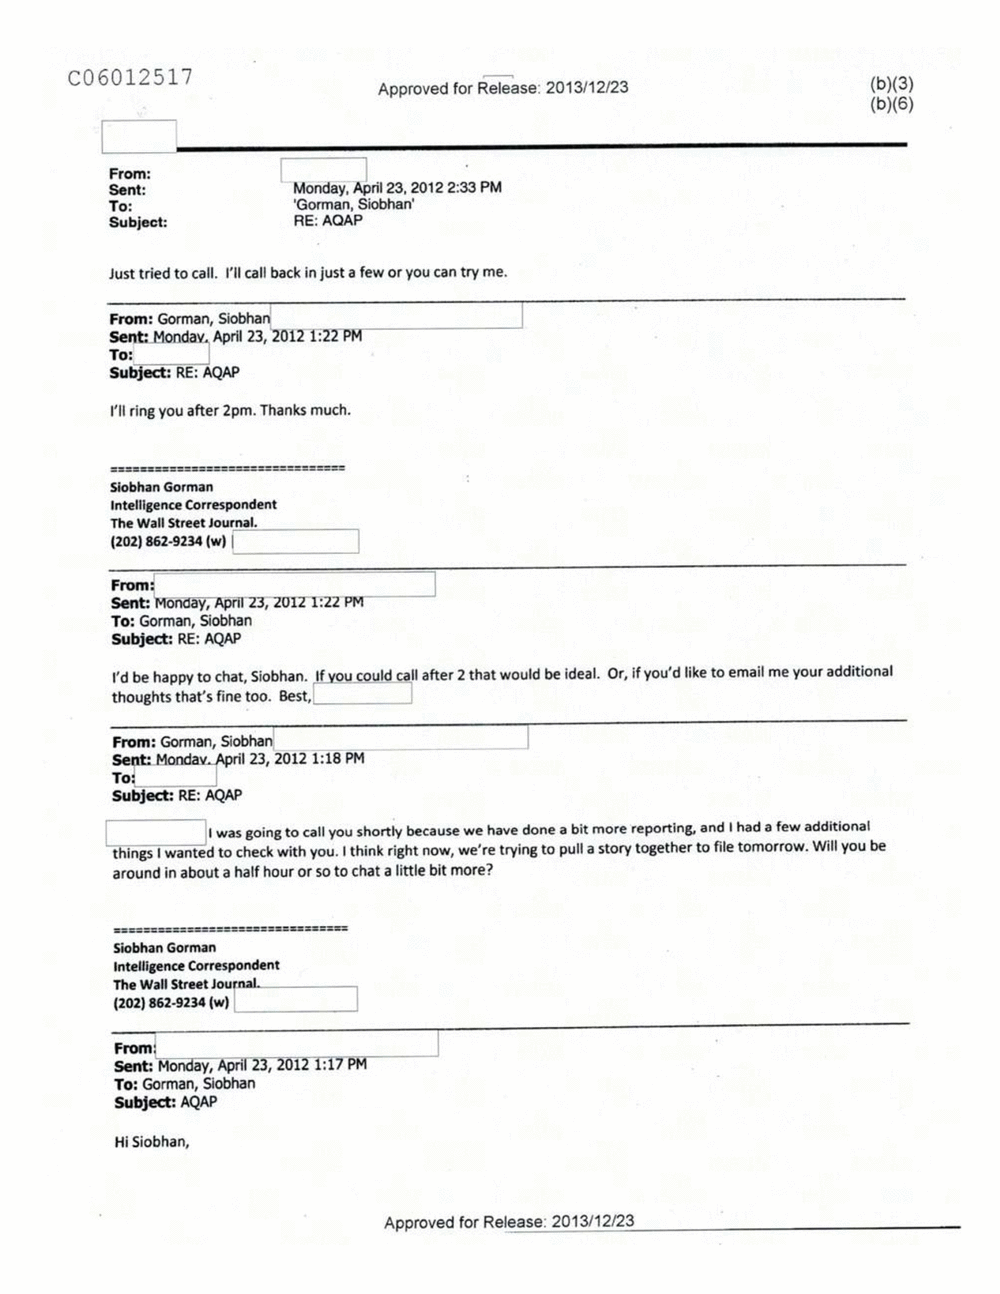 Page 35 from Email Correspondence Between Reporters and CIA Flacks